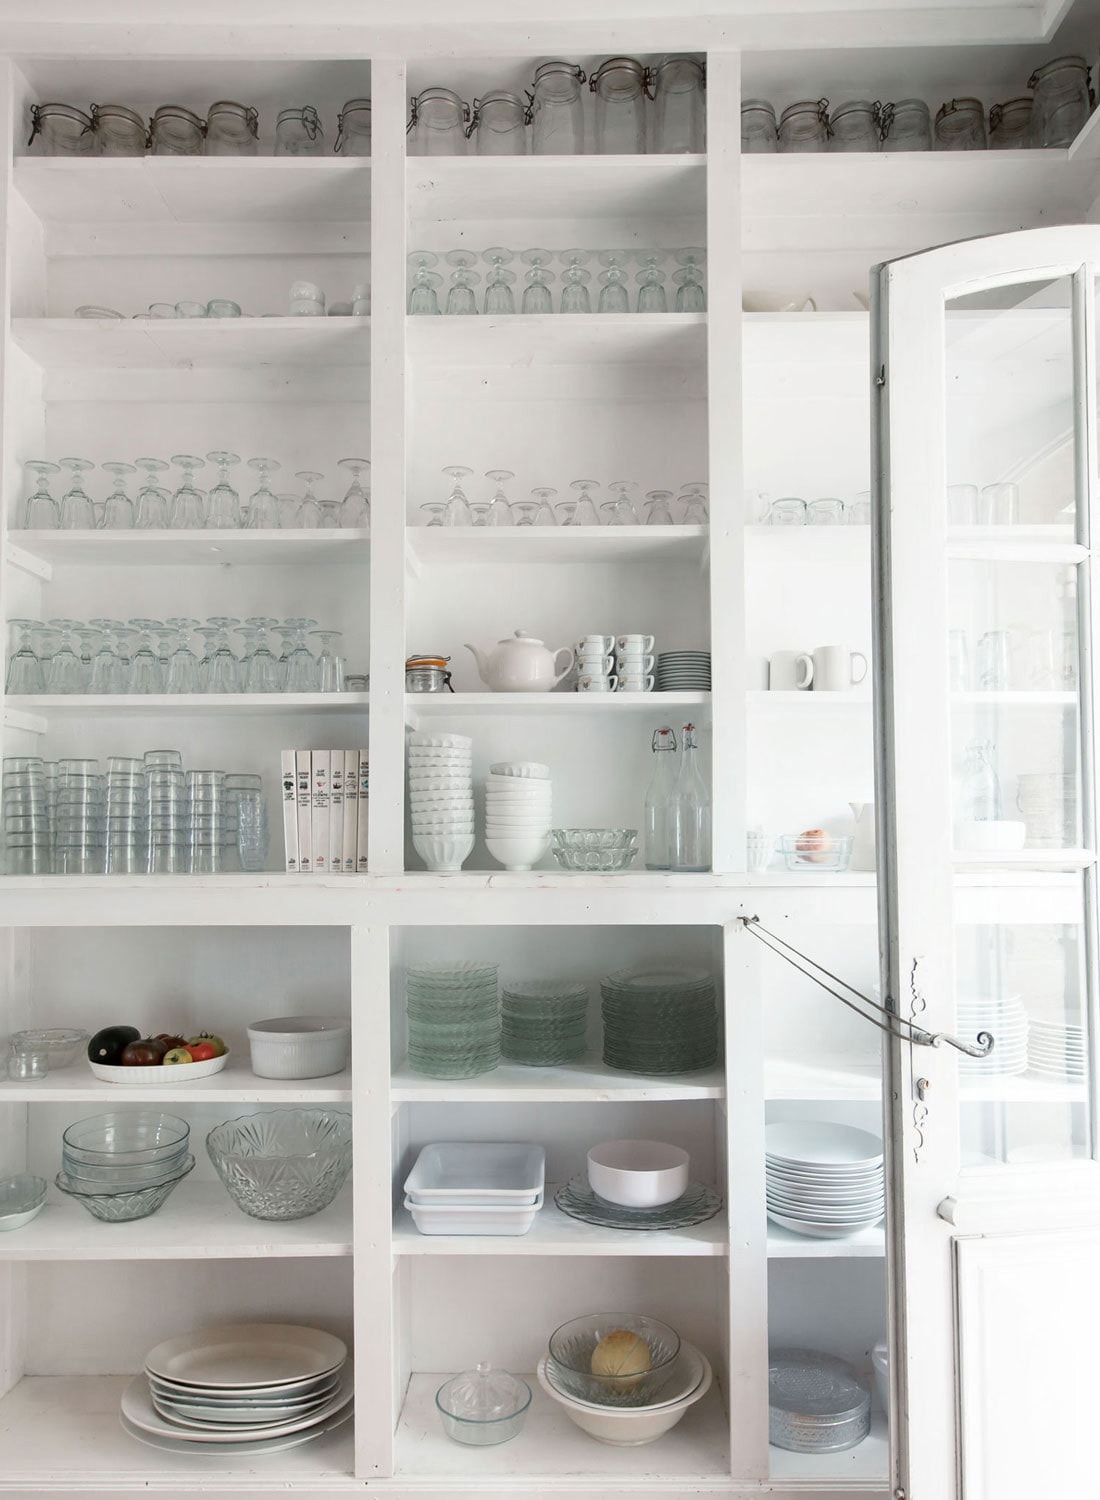 Kitchen shelves are stacked with beautifully organized glass jars, drinking glasses and assorted dishes